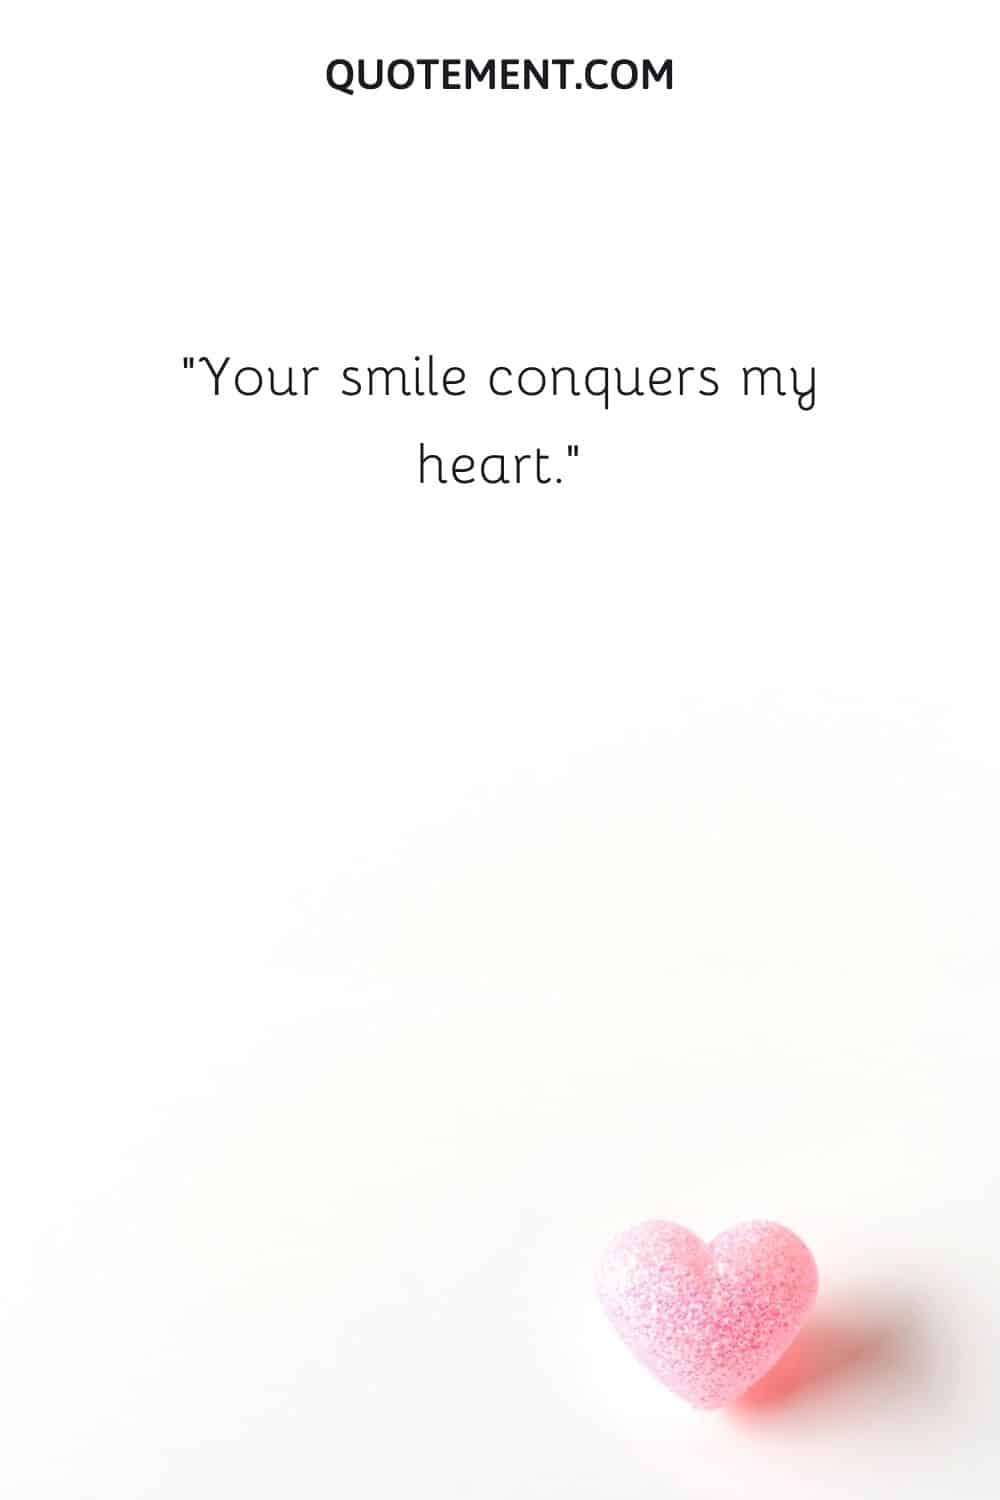 Your smile conquers my heart.